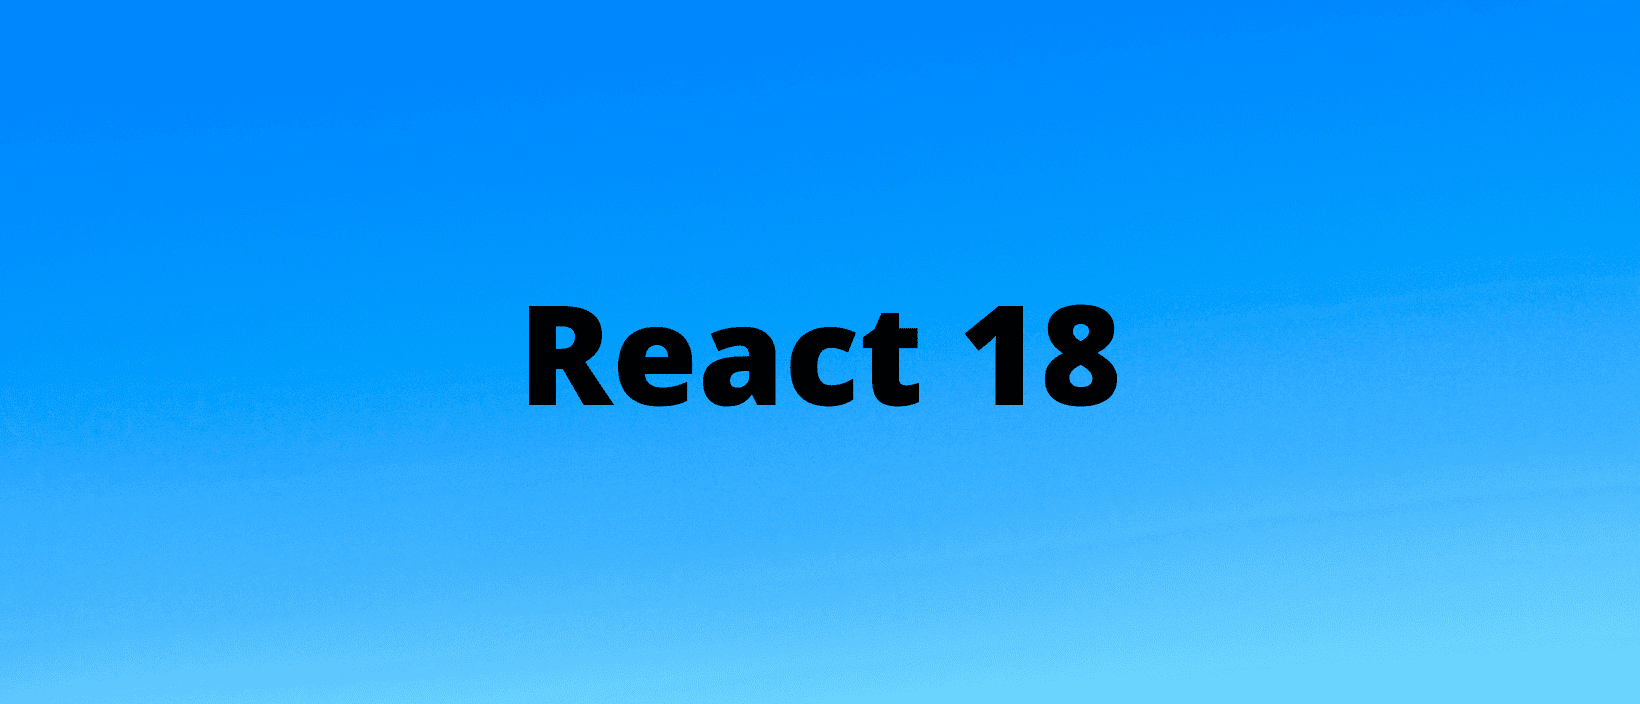 The React team has been hard at work for over a year. React is changing yet again, and it's time to start learning where it's going next.